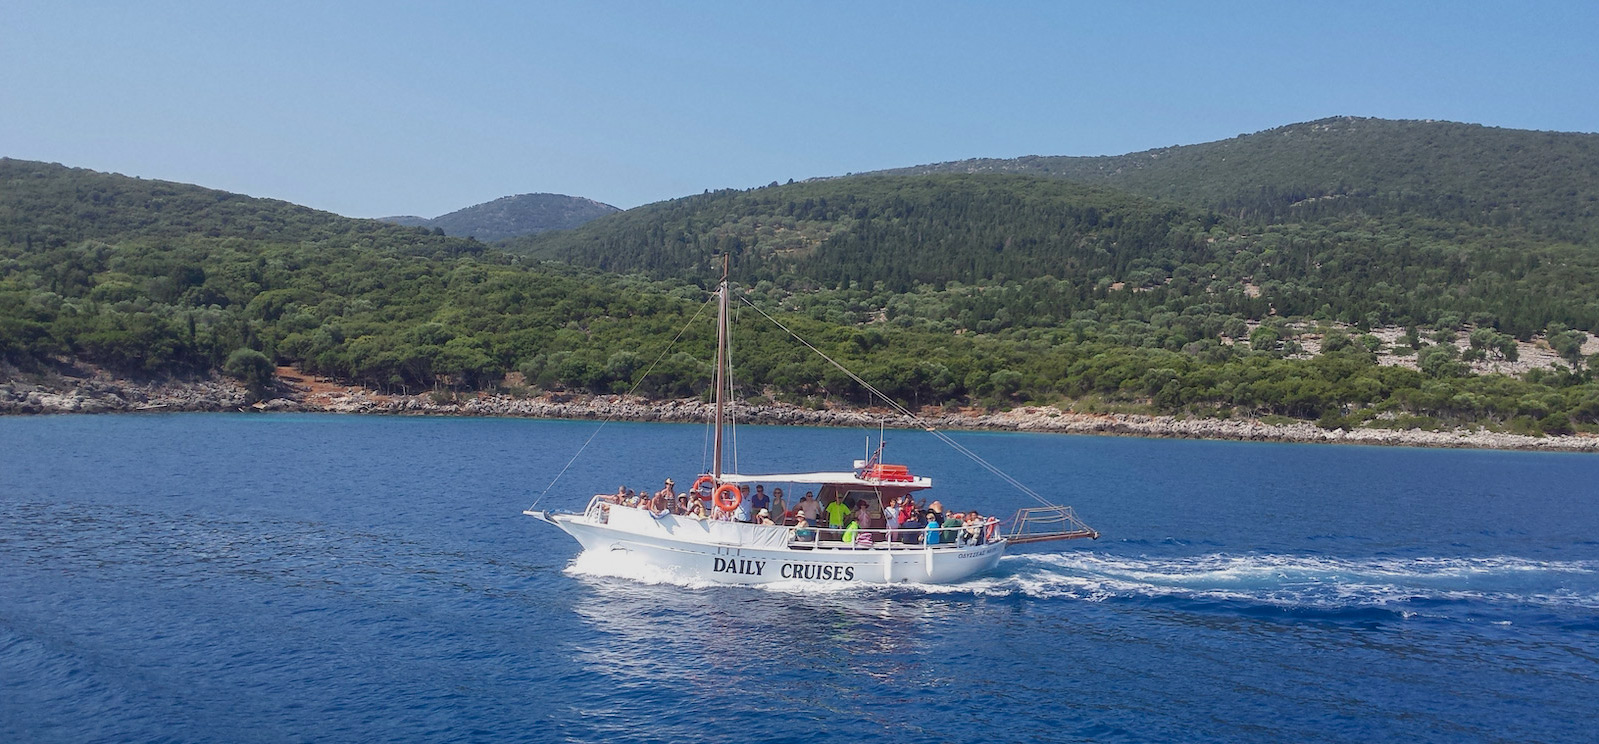 Fiscardo Cruises Kefalonia | Kefalonia Daily Cruises from Fiscardo to Ithaca with the traditional boat “Odysseas”. Kefalonia Cruises - Daily Cruises to Ithaca - Kefalonia day cruises - Kefalonia private cruises - Fiscardo Daily Cruises to Ithaca - Fiscardo Private Cruises